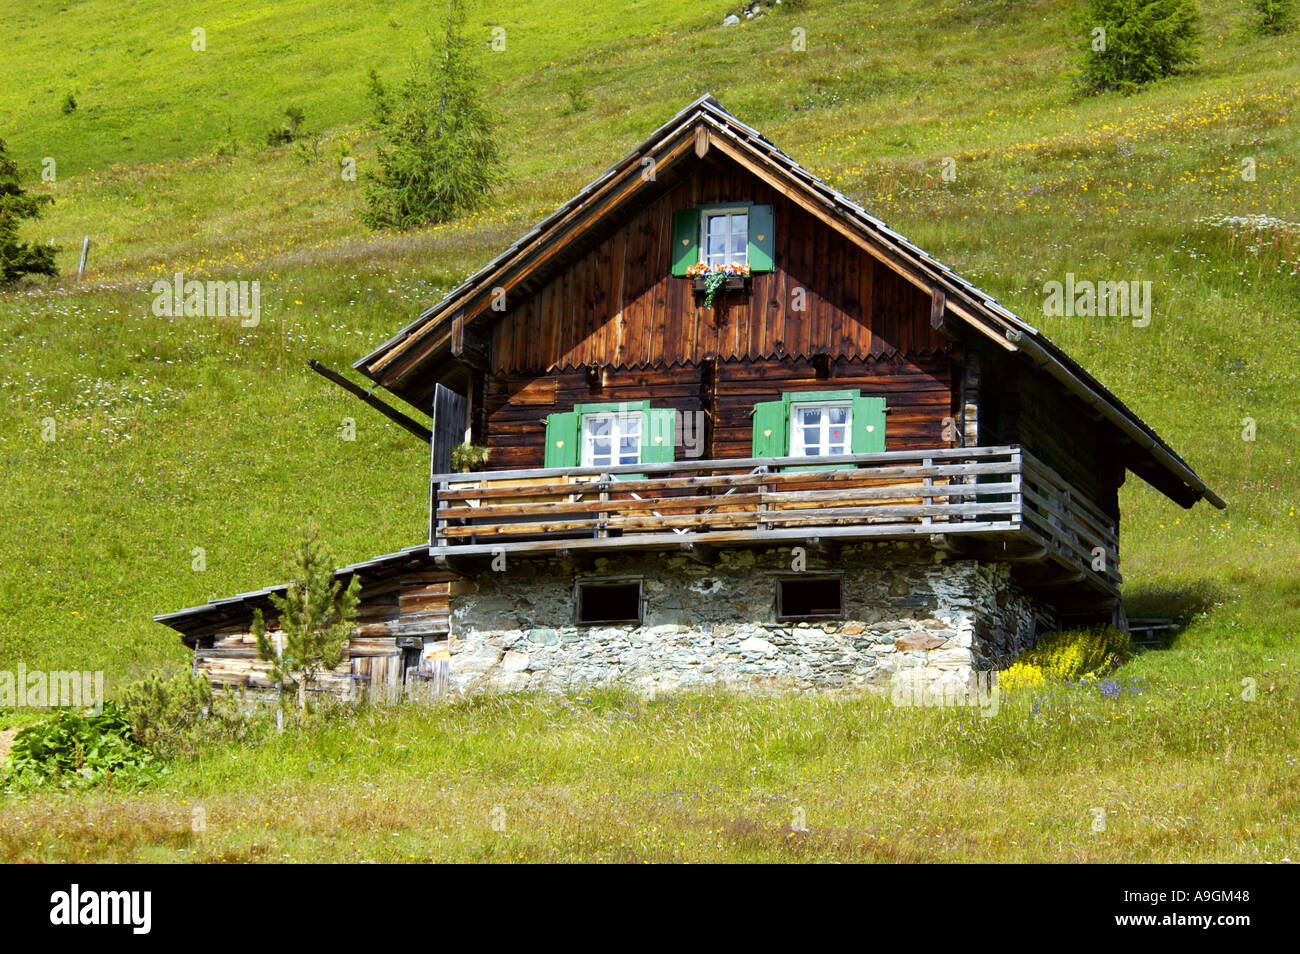 alpine hut, old farm house built in traditional style, Austria, NP Hohe ...